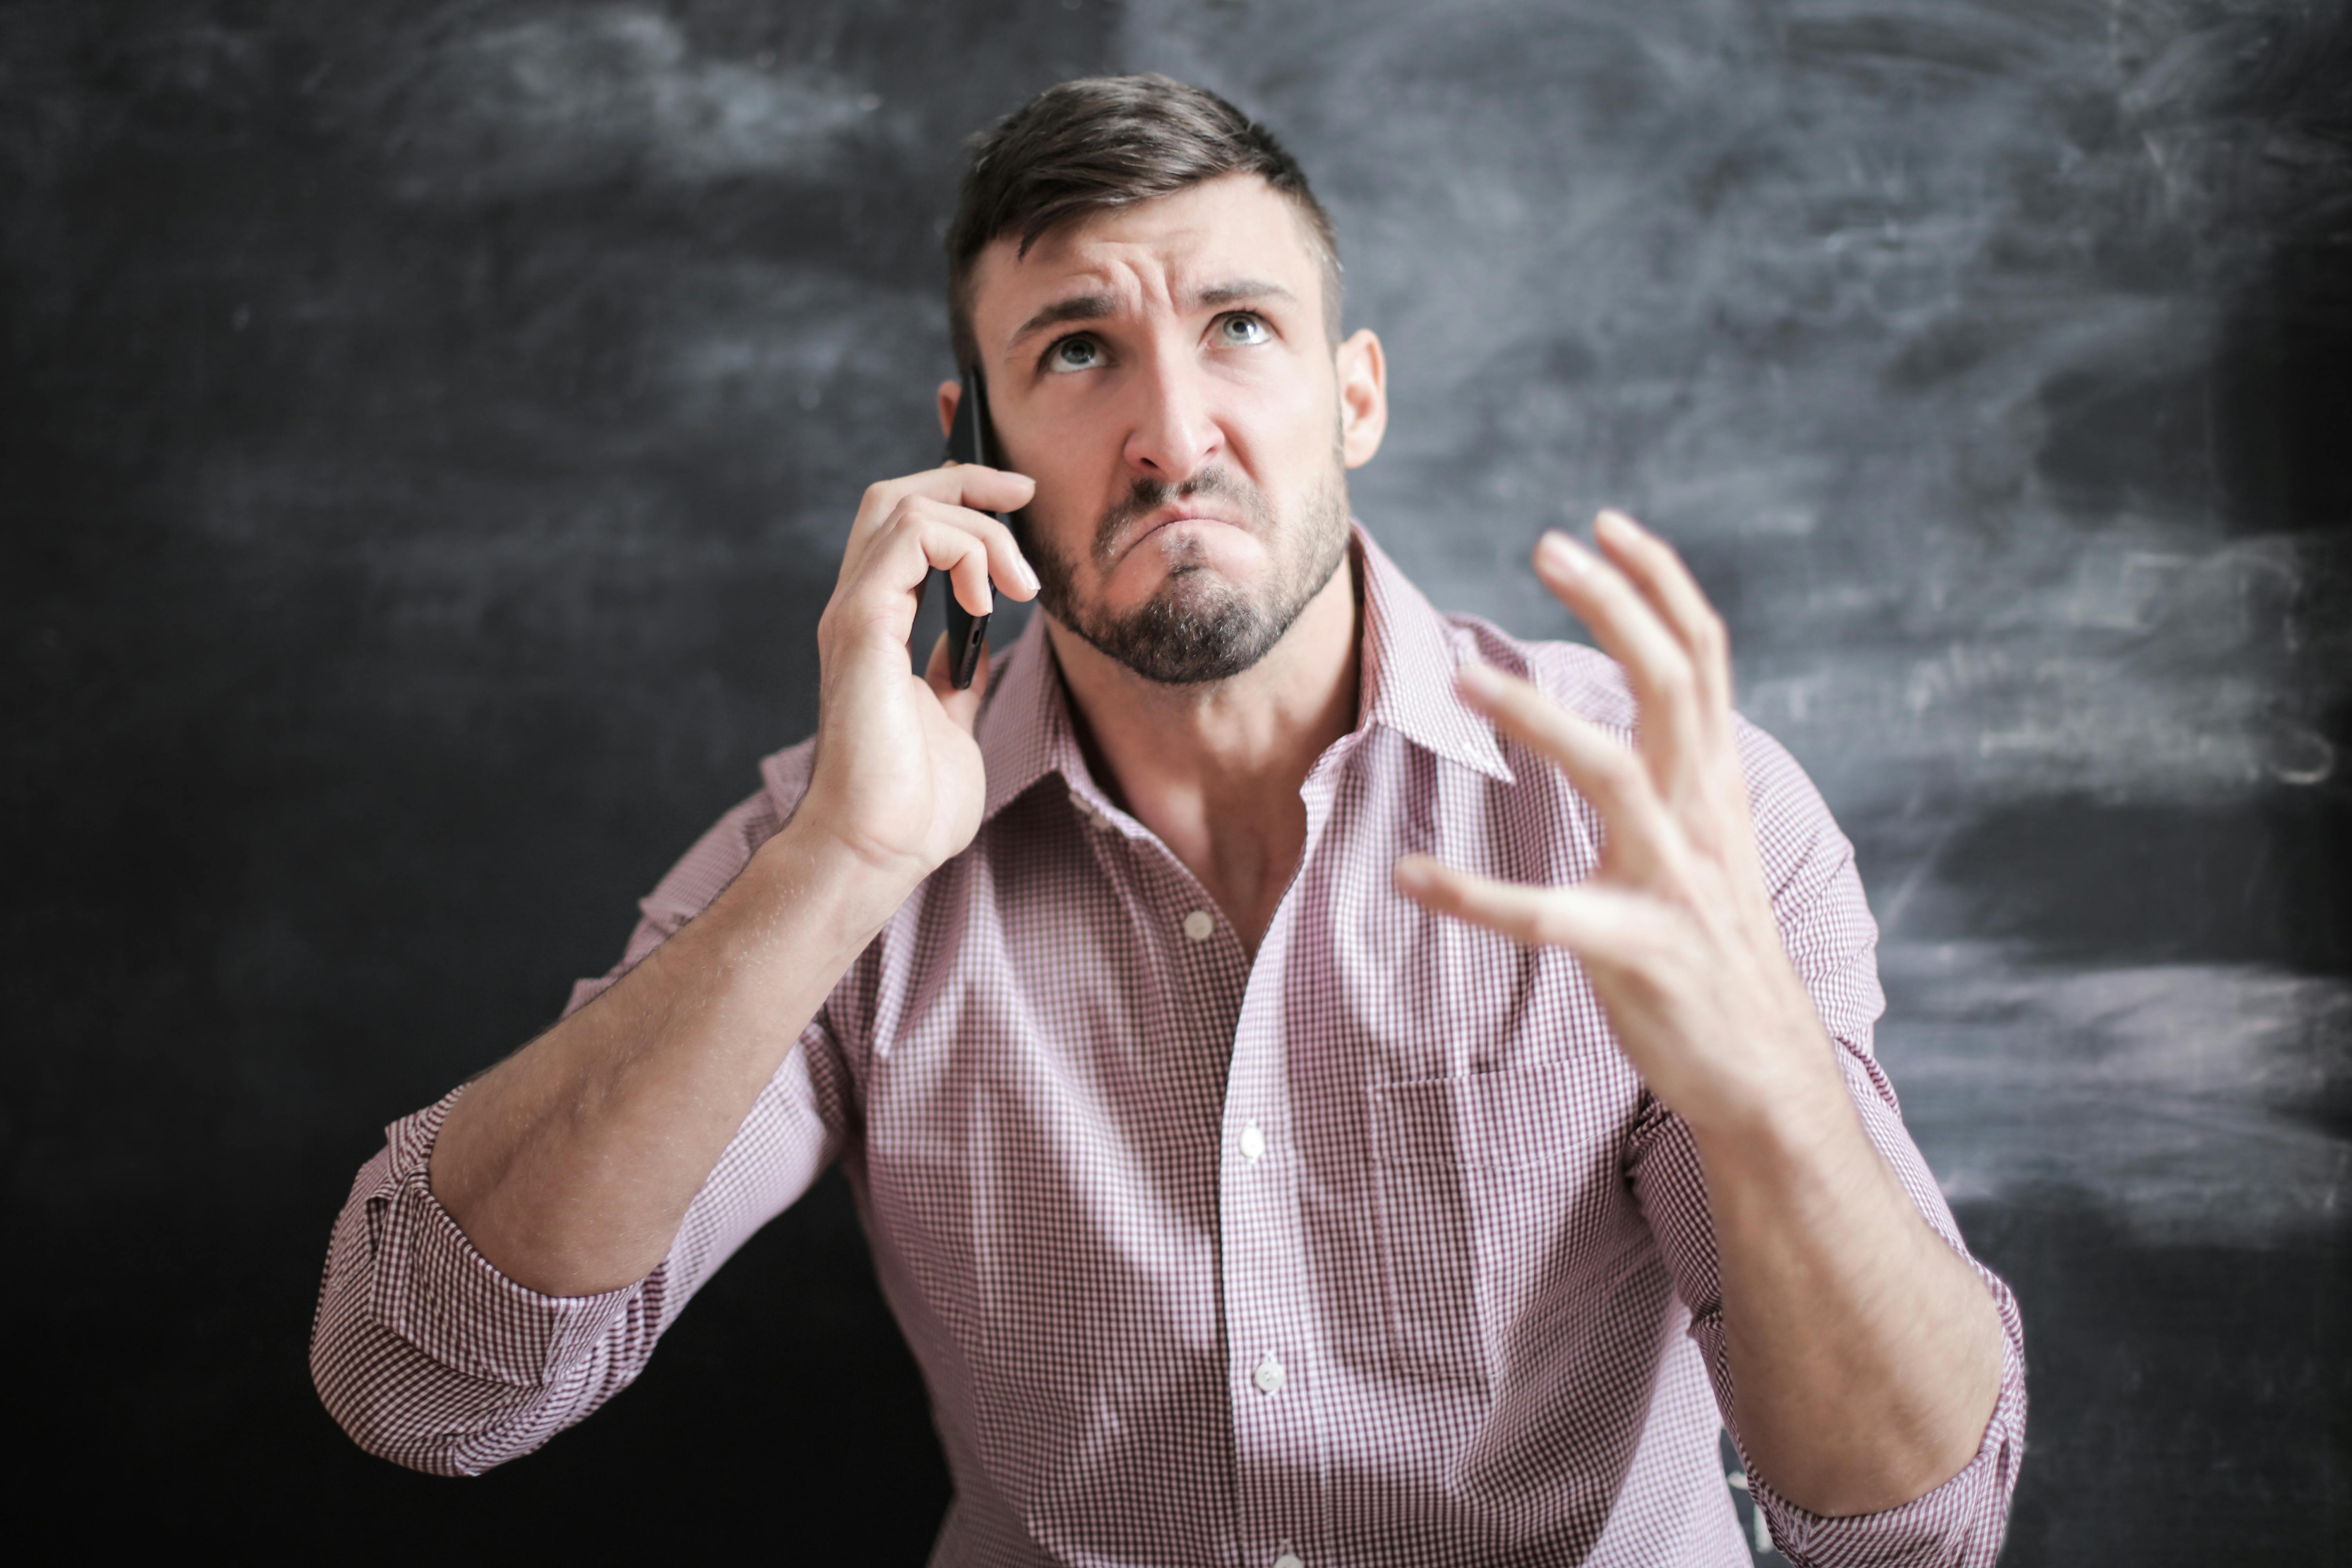 A man  angry while on the phone  | Source: Pexels